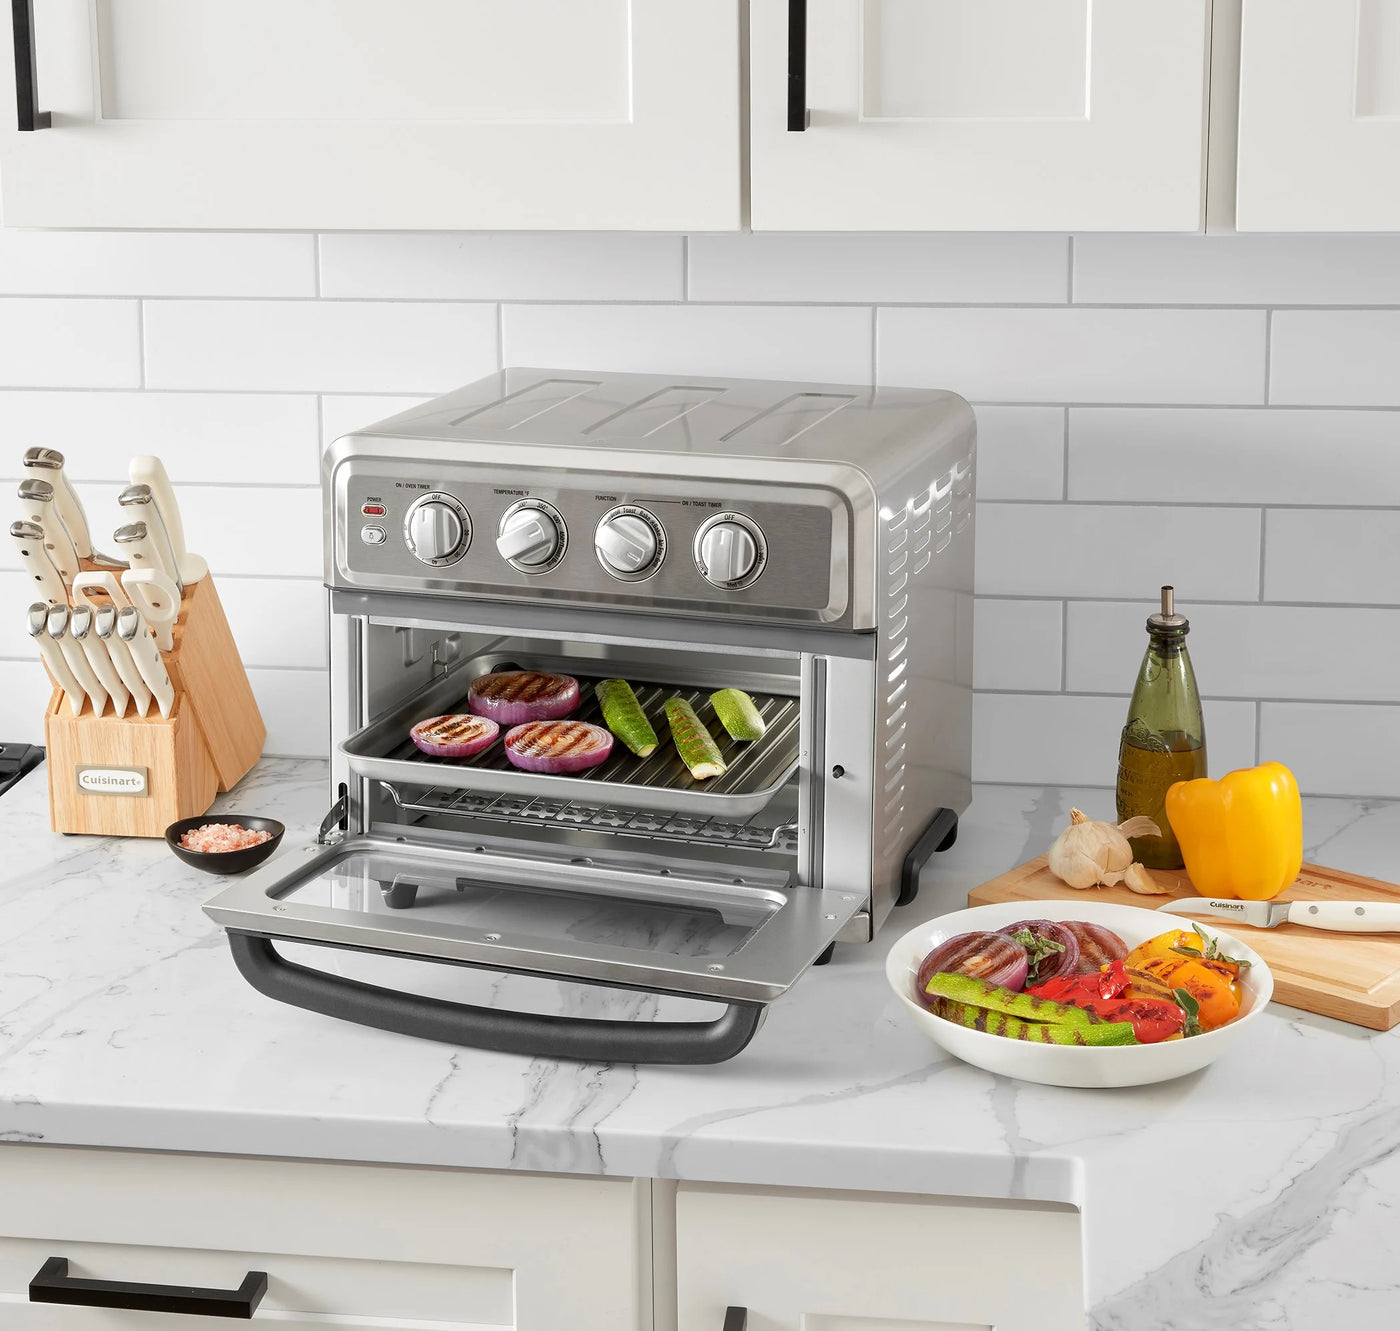 Cuisinart Air Fryer Toaster Ovens in Toasters & Ovens 